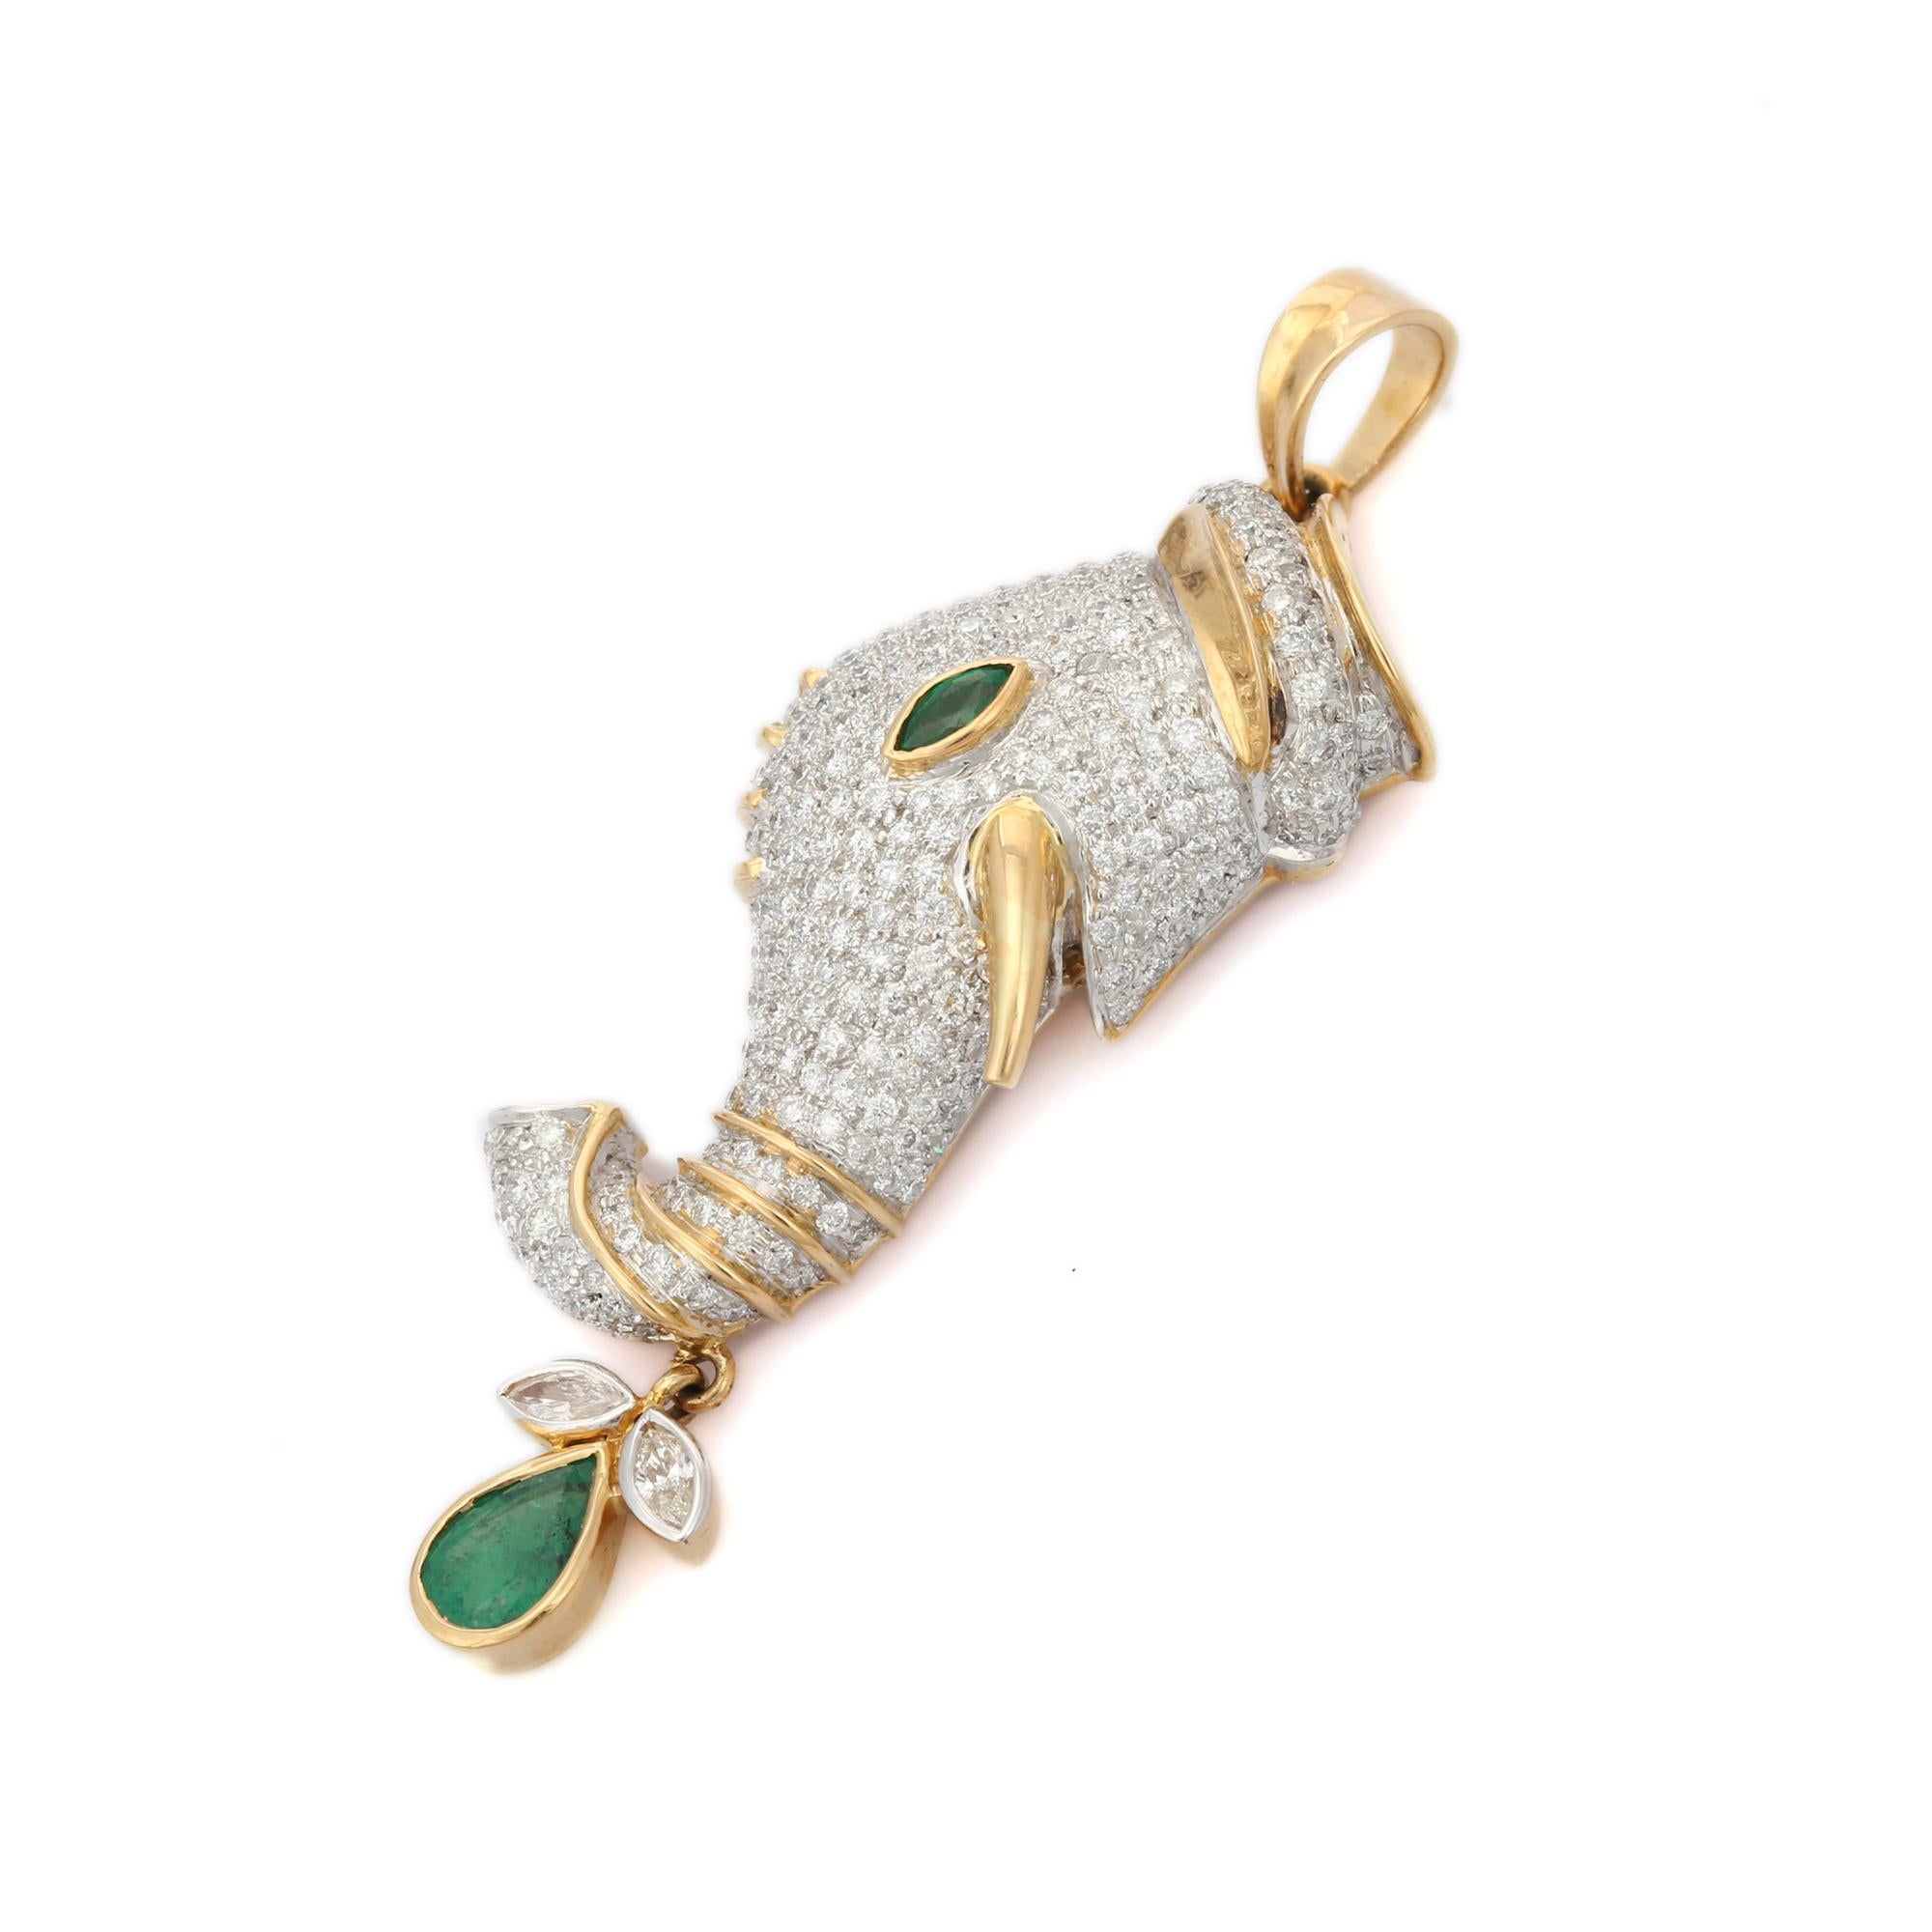 The 14 karat gold pendant is hand set with 1.1 carat emerald and 4.0 carats of shimmering diamonds. 

FOLLOW  MEGHNA JEWELS storefront to view the latest collection & exclusive pieces.  Meghna Jewels is proudly rated as a Top Seller on 1stdibs with